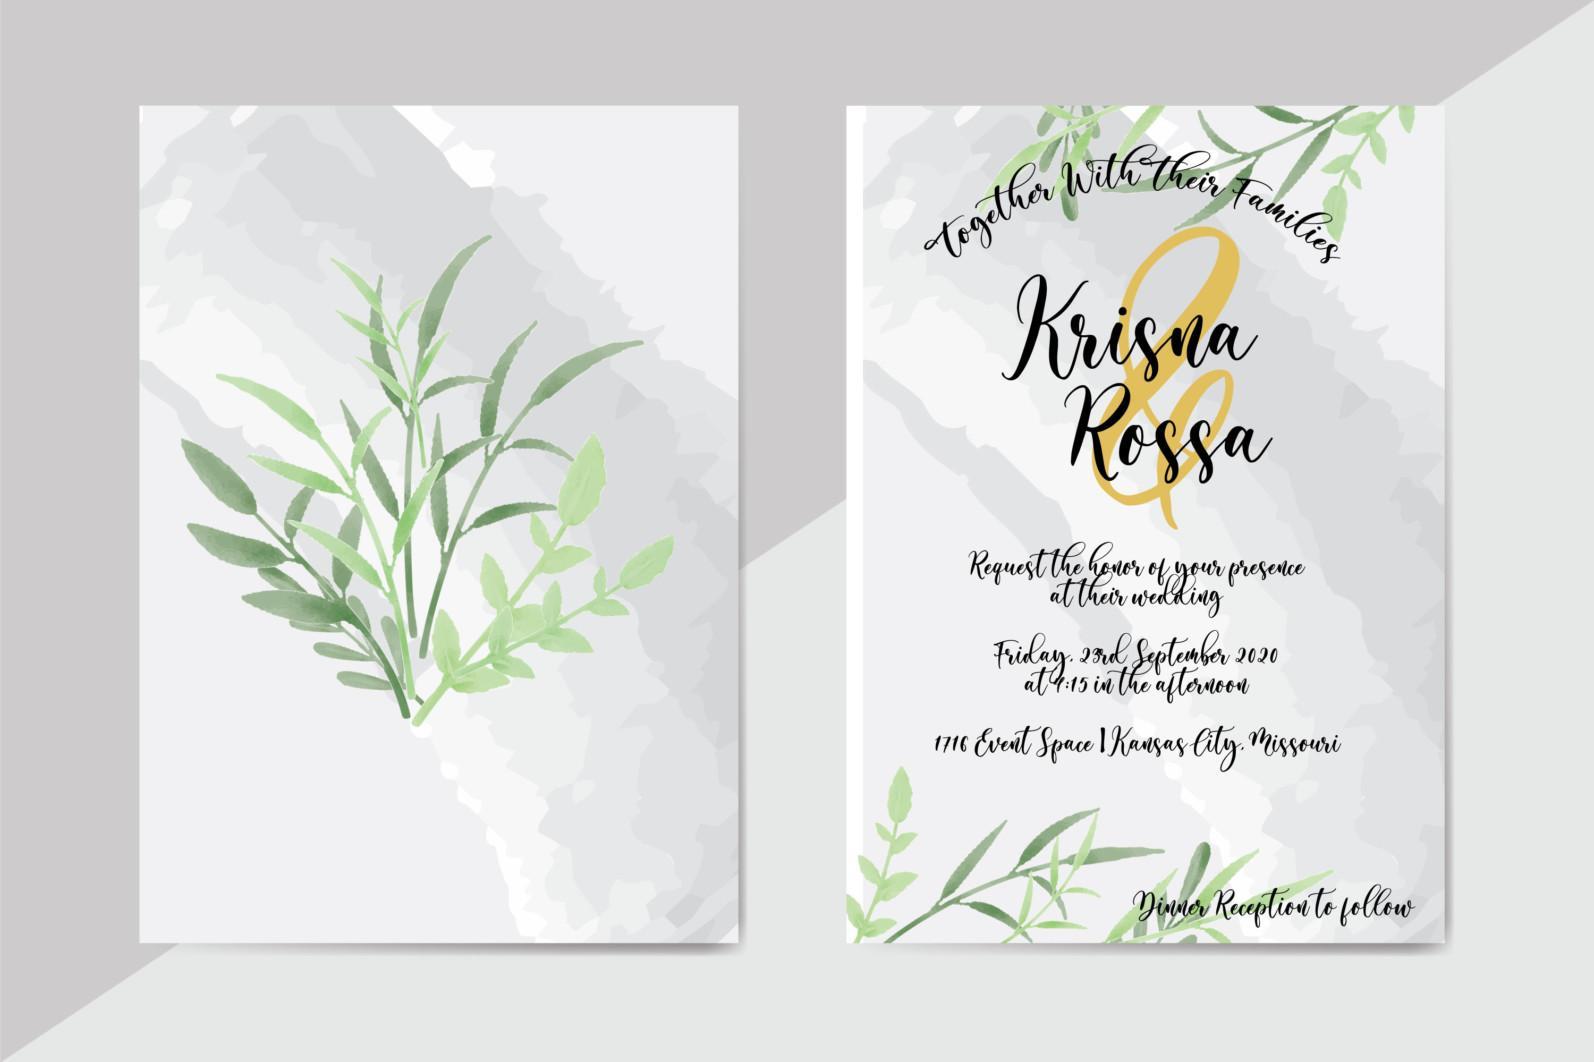 Wedding Invitation Card with Watercolor Floral Decoration - Watercolor Flower Wedding Invitation Spring Bloom Hand Drawn 06 05 scaled -